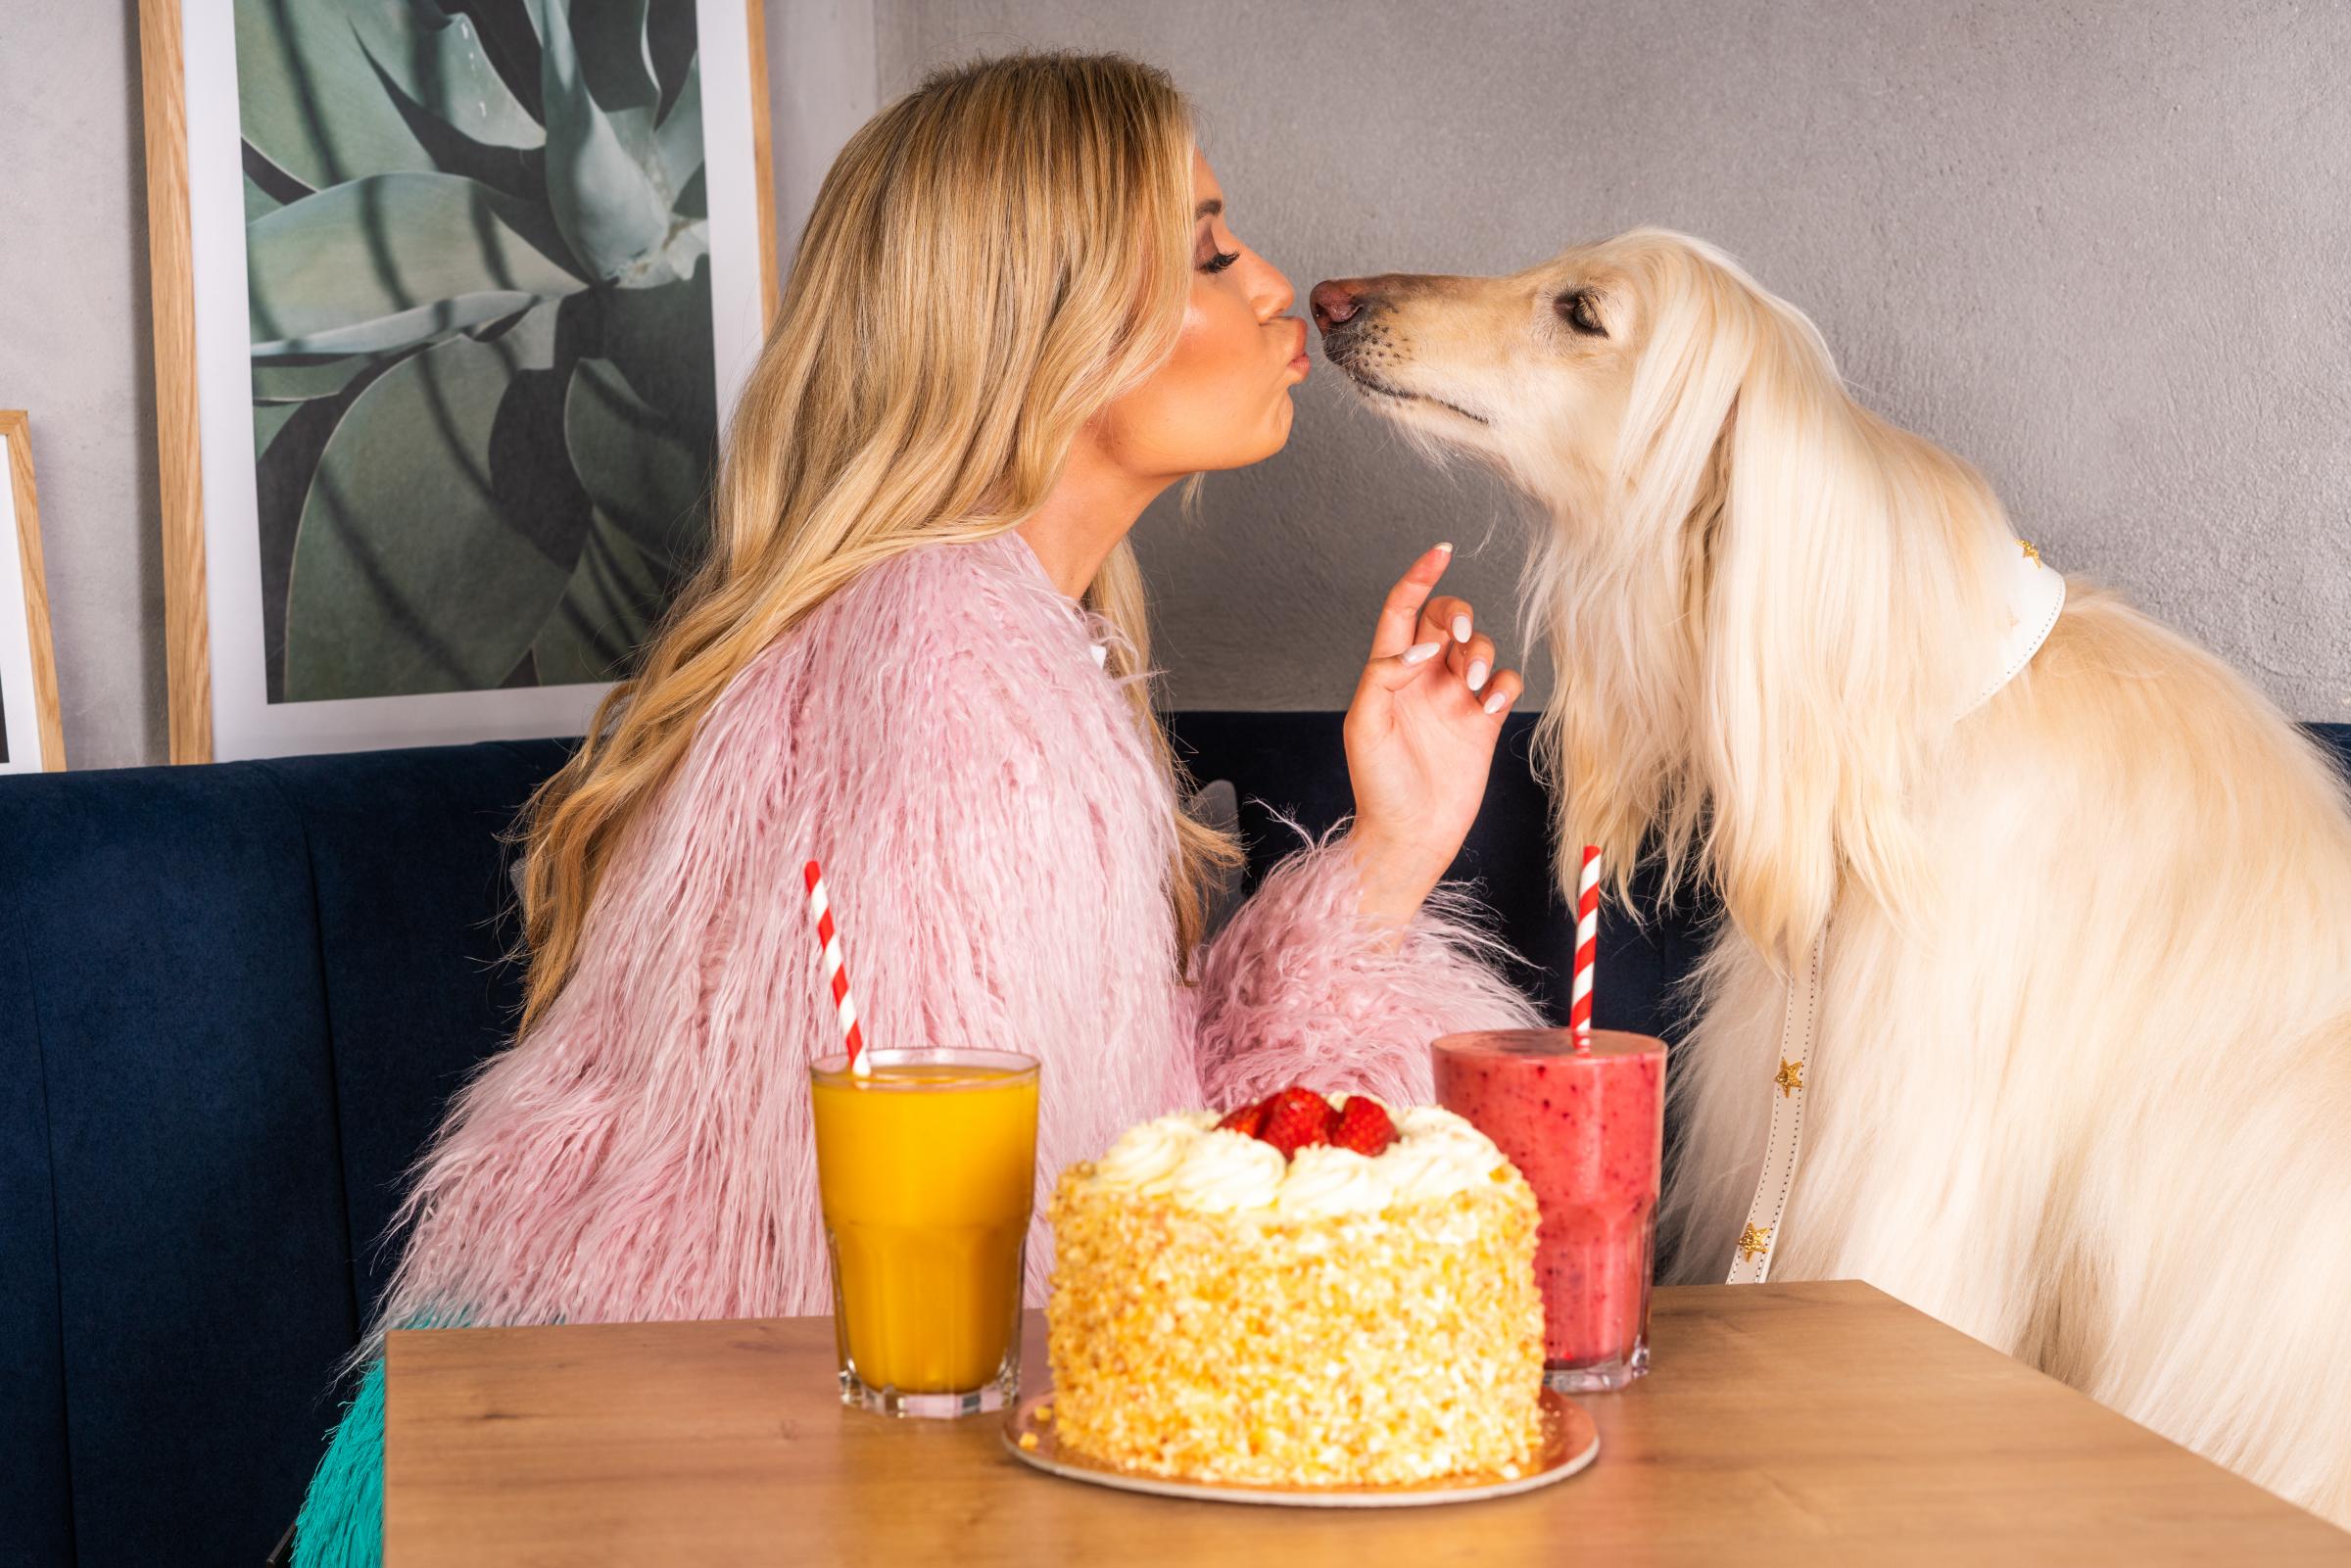 The new Puppy Love pop-up cafe will open on Valentines Day with treats for humans and dogs.